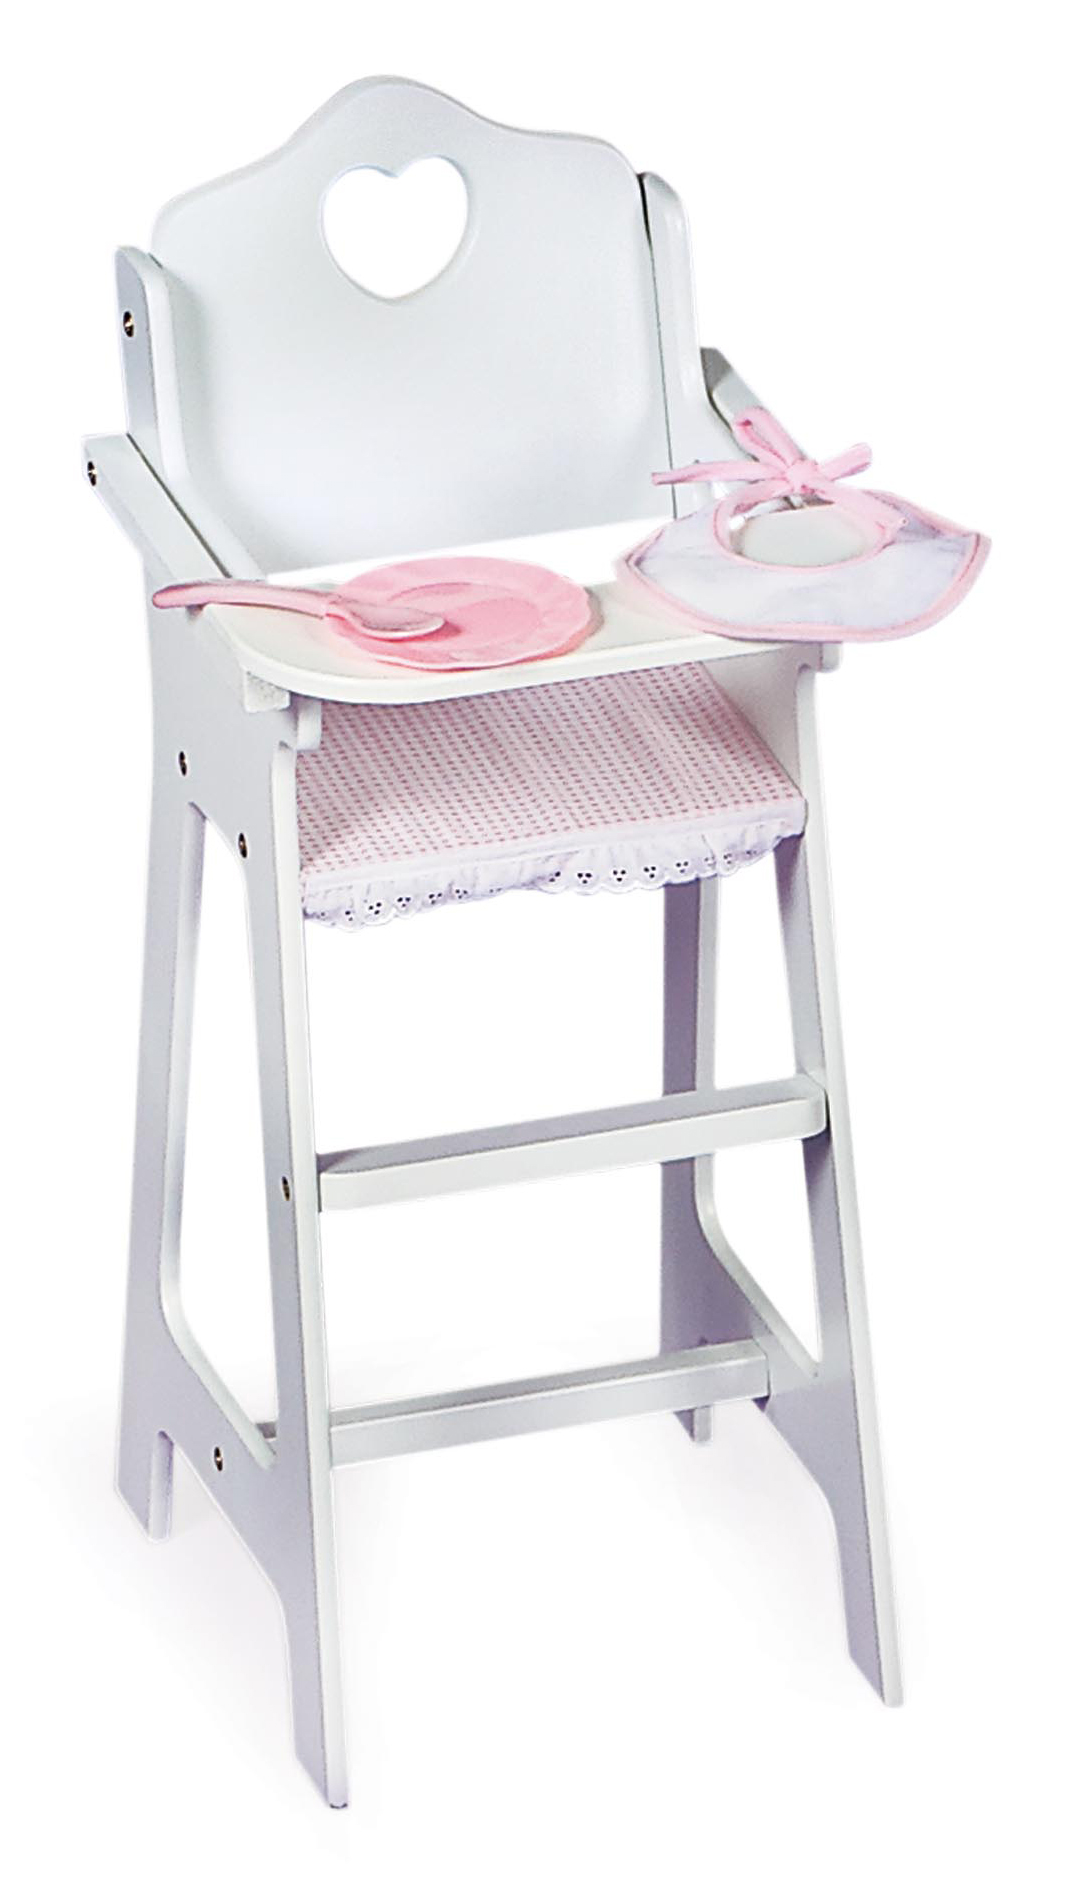 Doll High Chair with Accessories and Free Personalization Kit - White/Pink/Gingham